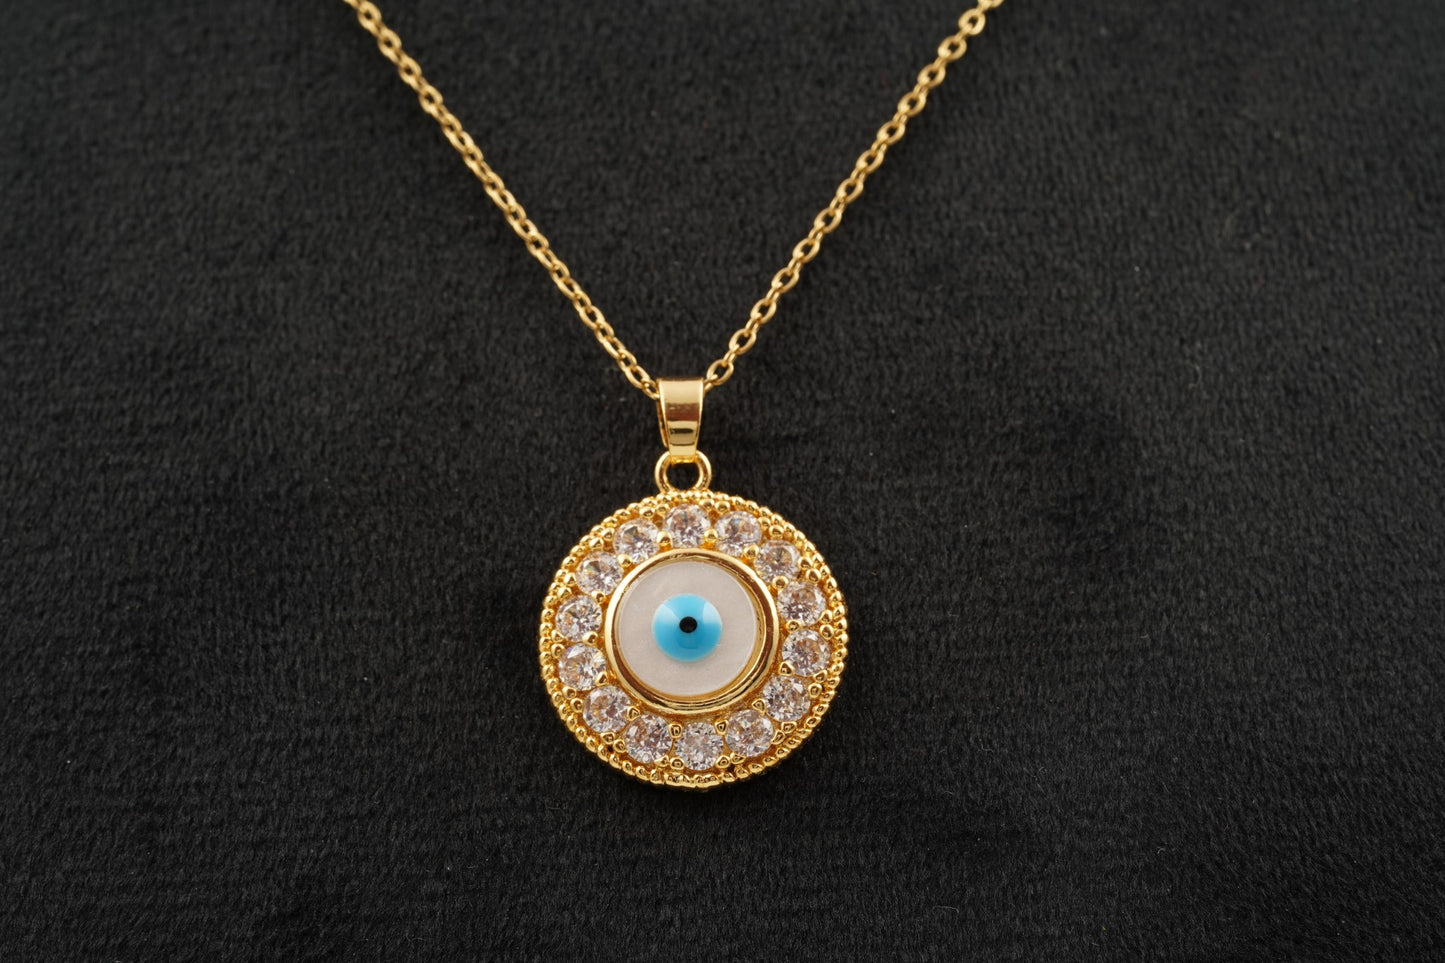 Evil Eye Pendant Necklace With Diamond With Gold Chain For Women